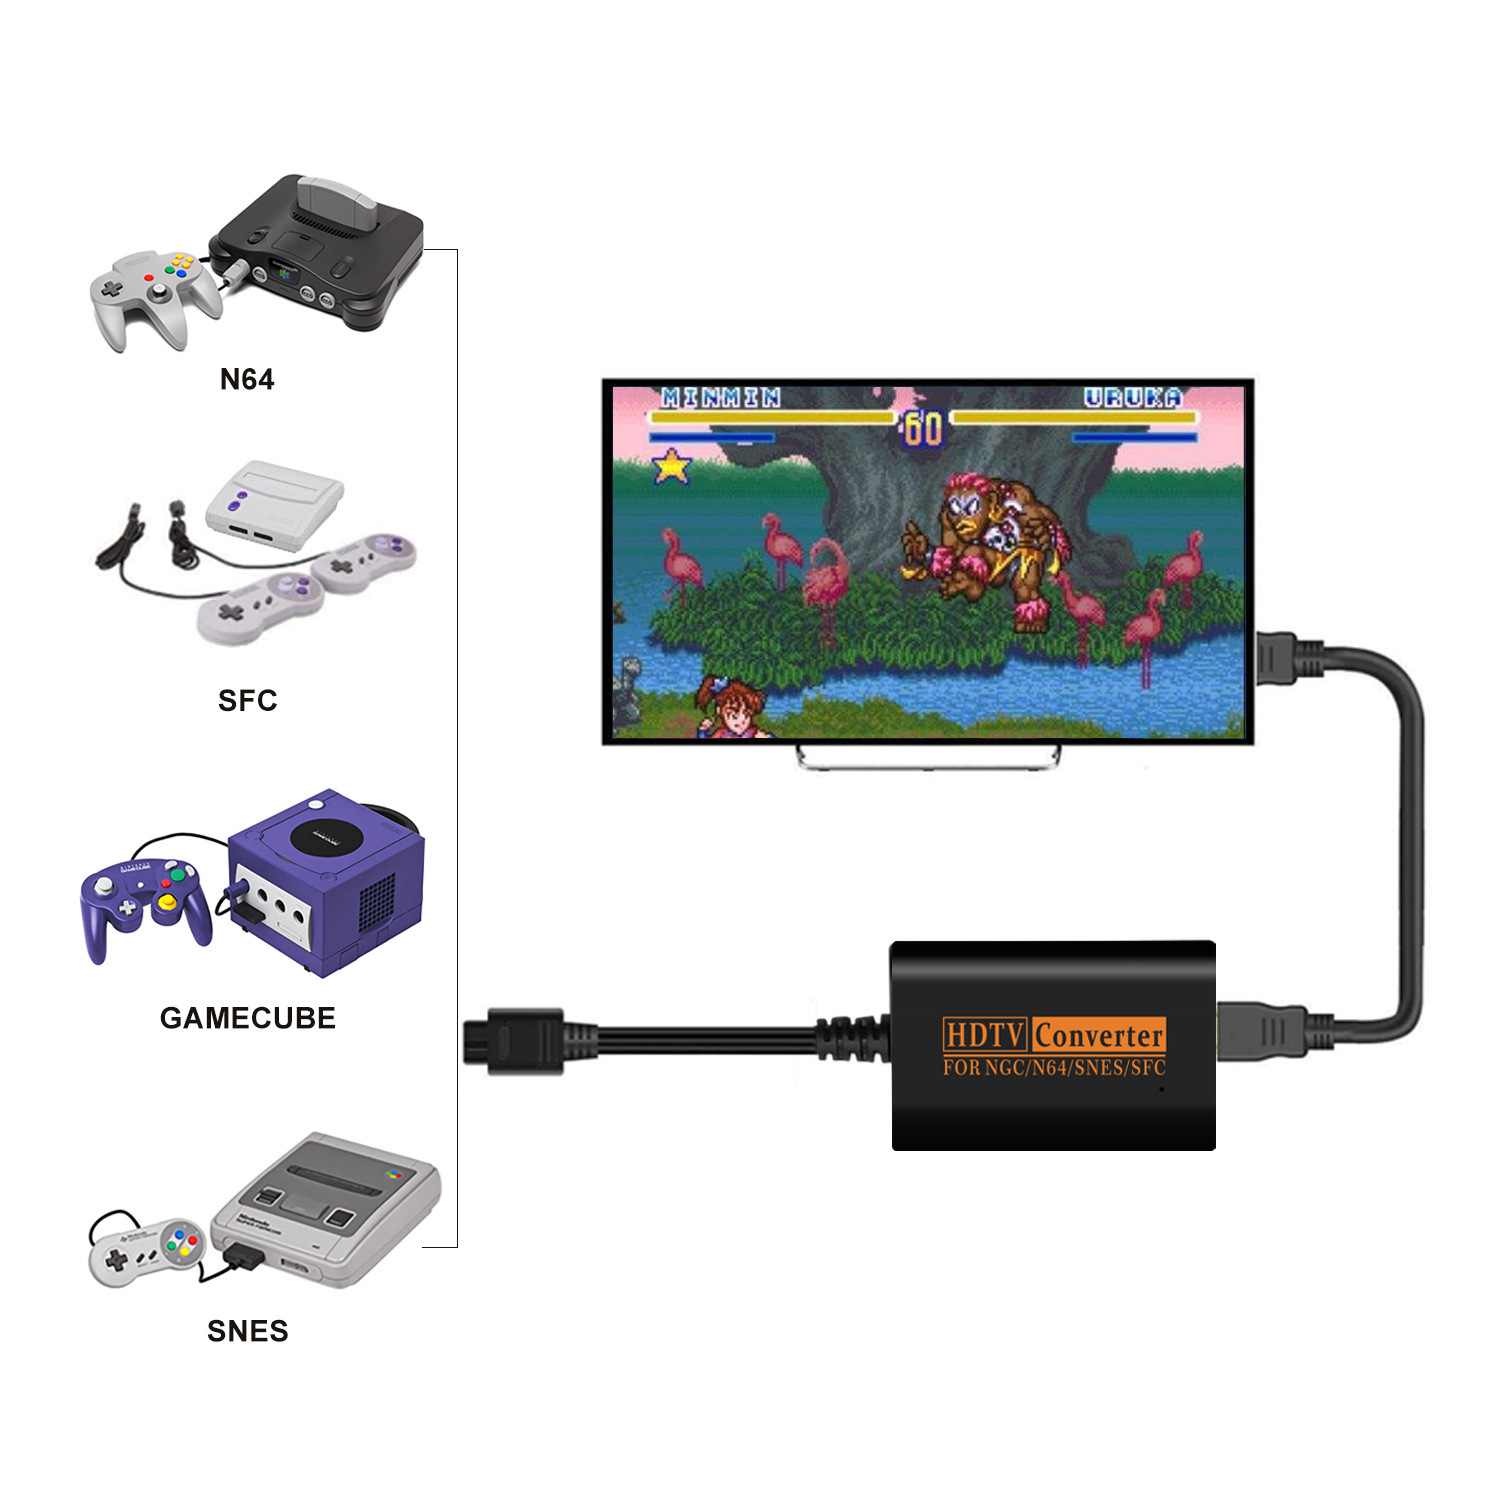 Bitfunx-HDMI-compatible-Converter-Adapter-for-NGCSNESN64SFC-for-Nintendo-64-for-GameCube-Plug-And-Pl-1887824-3